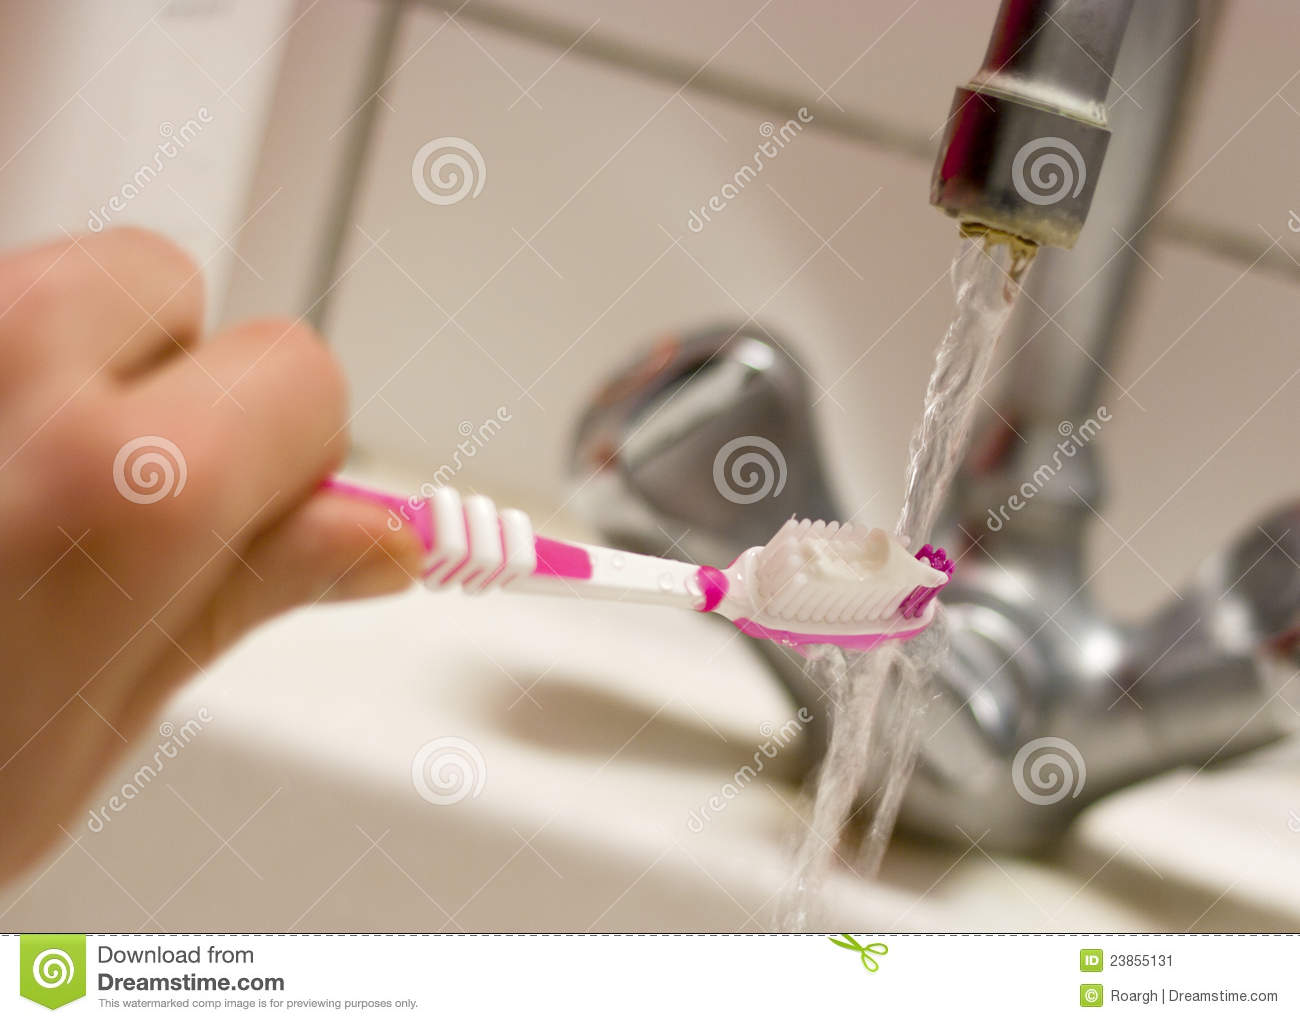 Hand Holding A Pink Toothbrush With Toothpaste On Top Under A Running